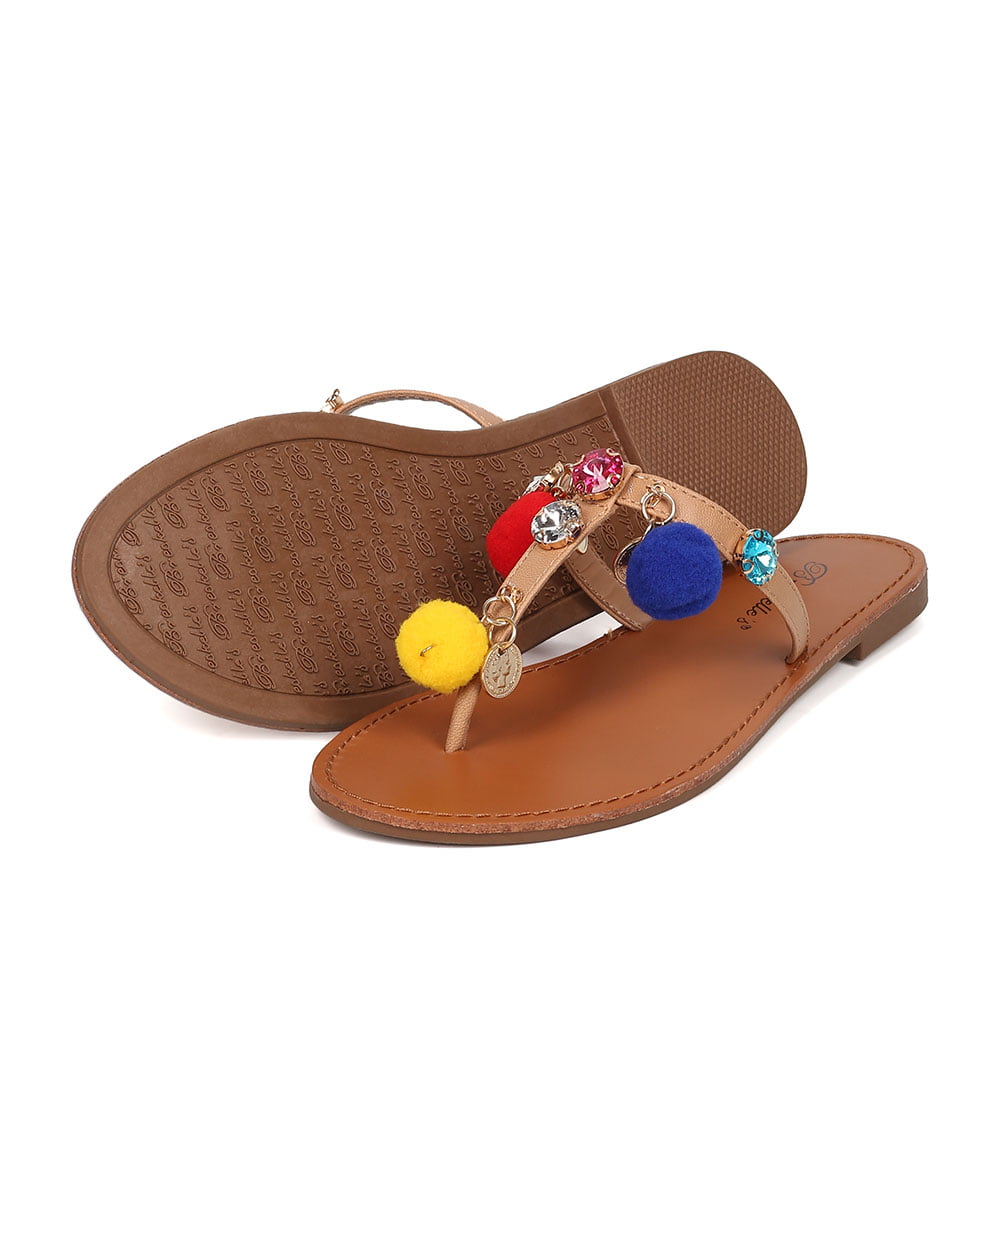 Women Leatherette T-Strap Dangling Charms and Pom Pom Sandal HA18